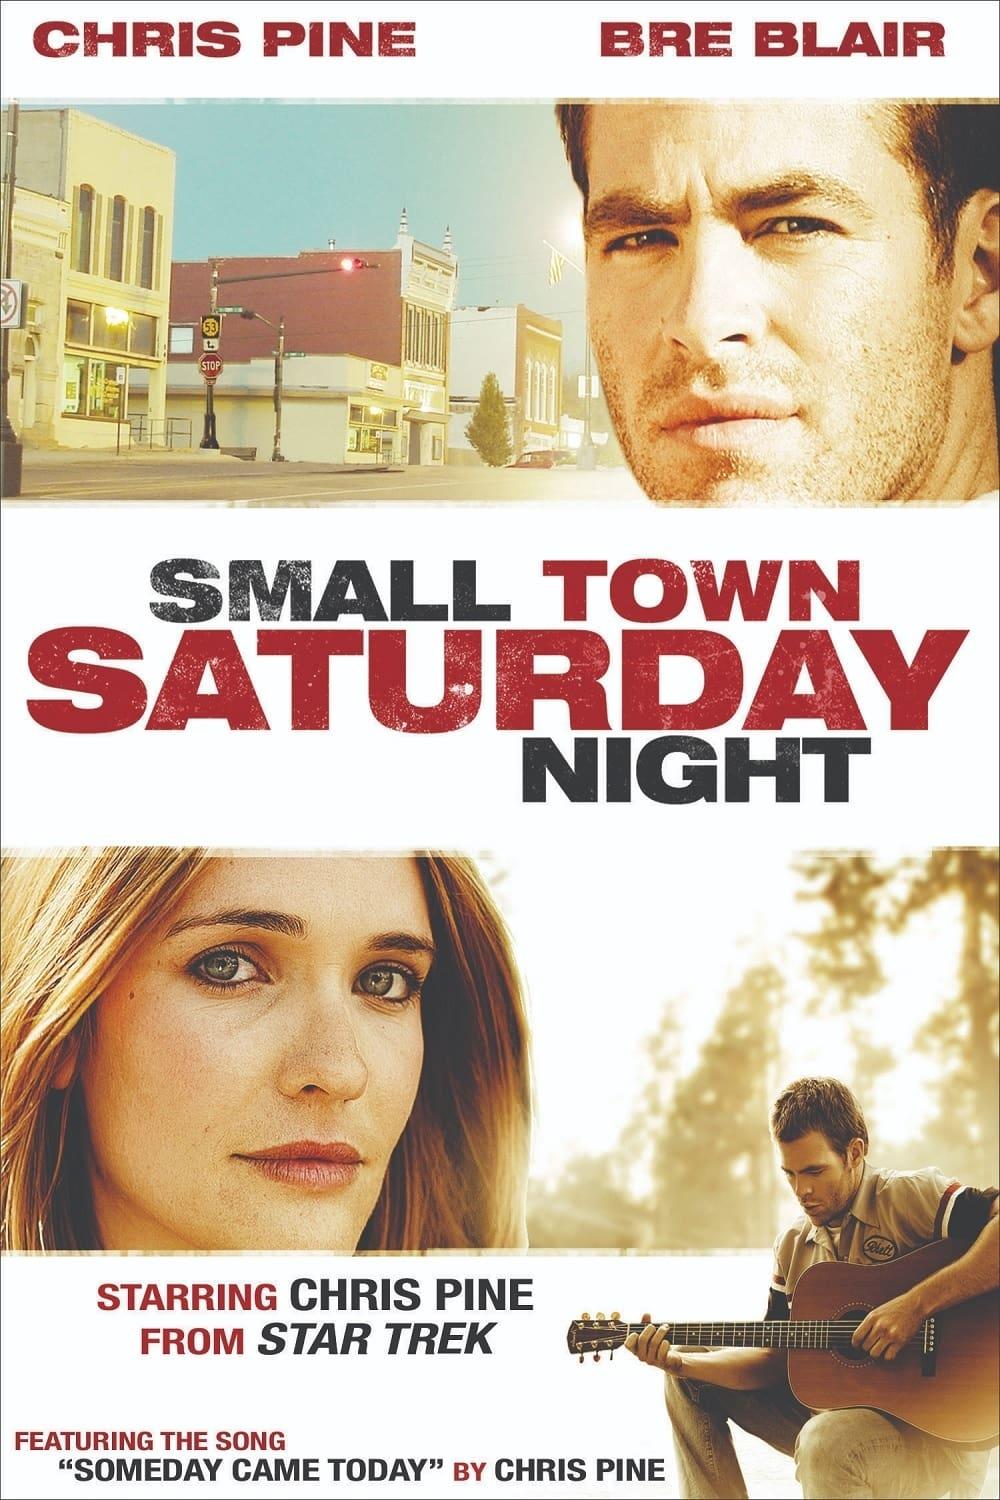 Small Town Saturday Night poster